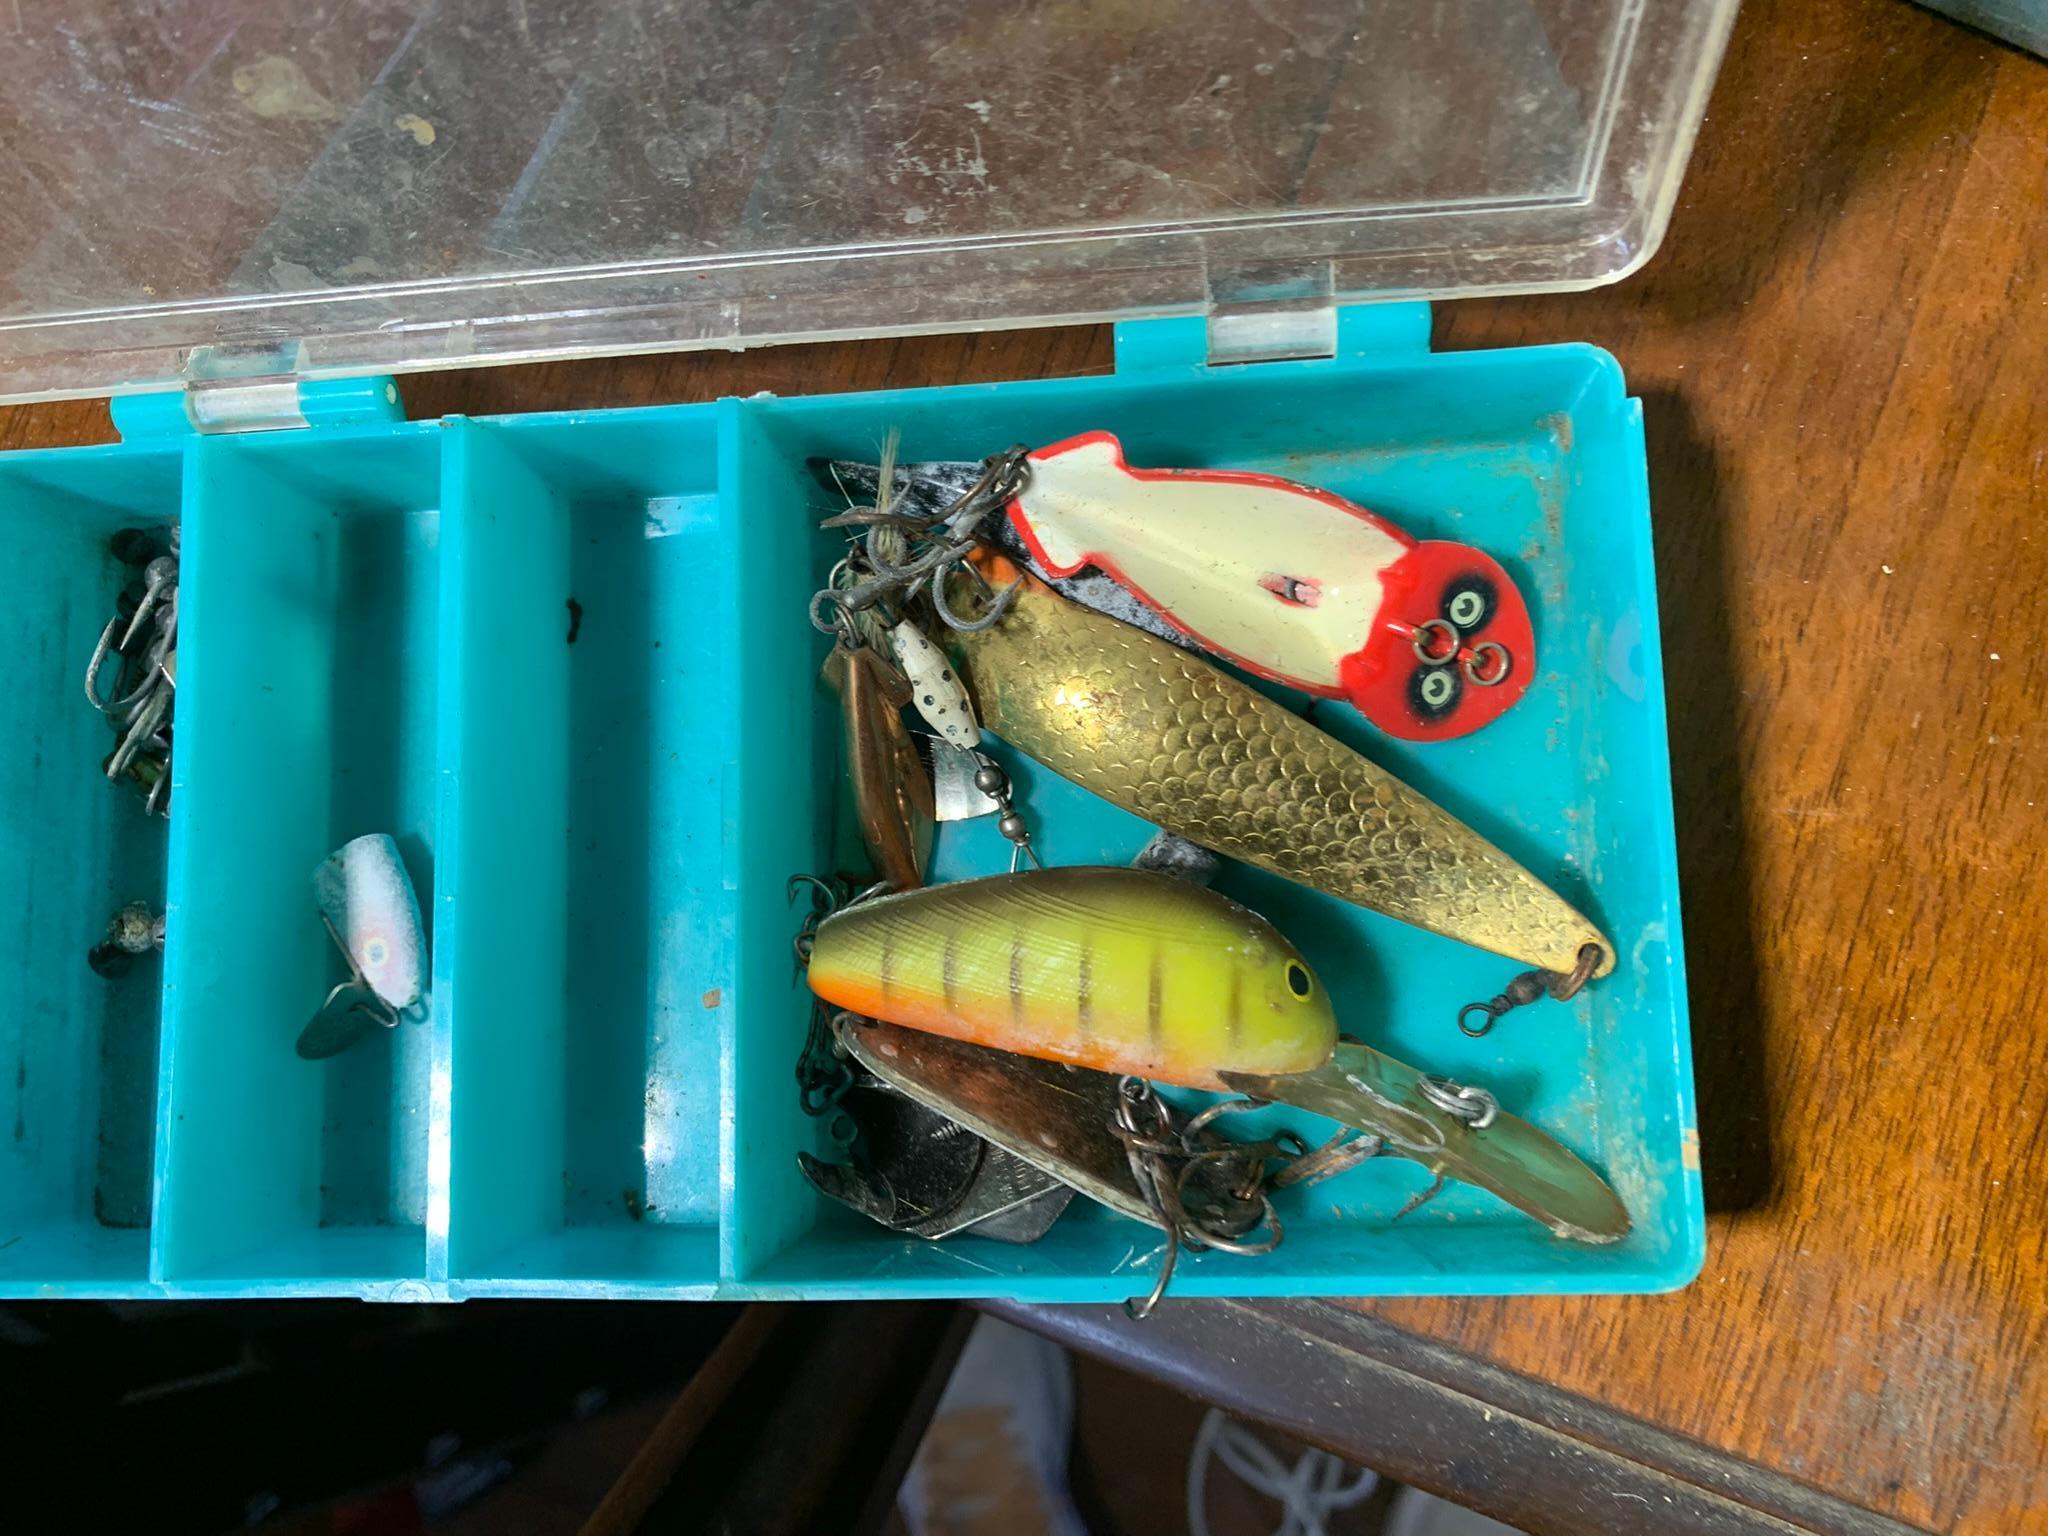 Group of Fishing Lures, Tackle Boxes, Deer Antlers & Coleman Lantern